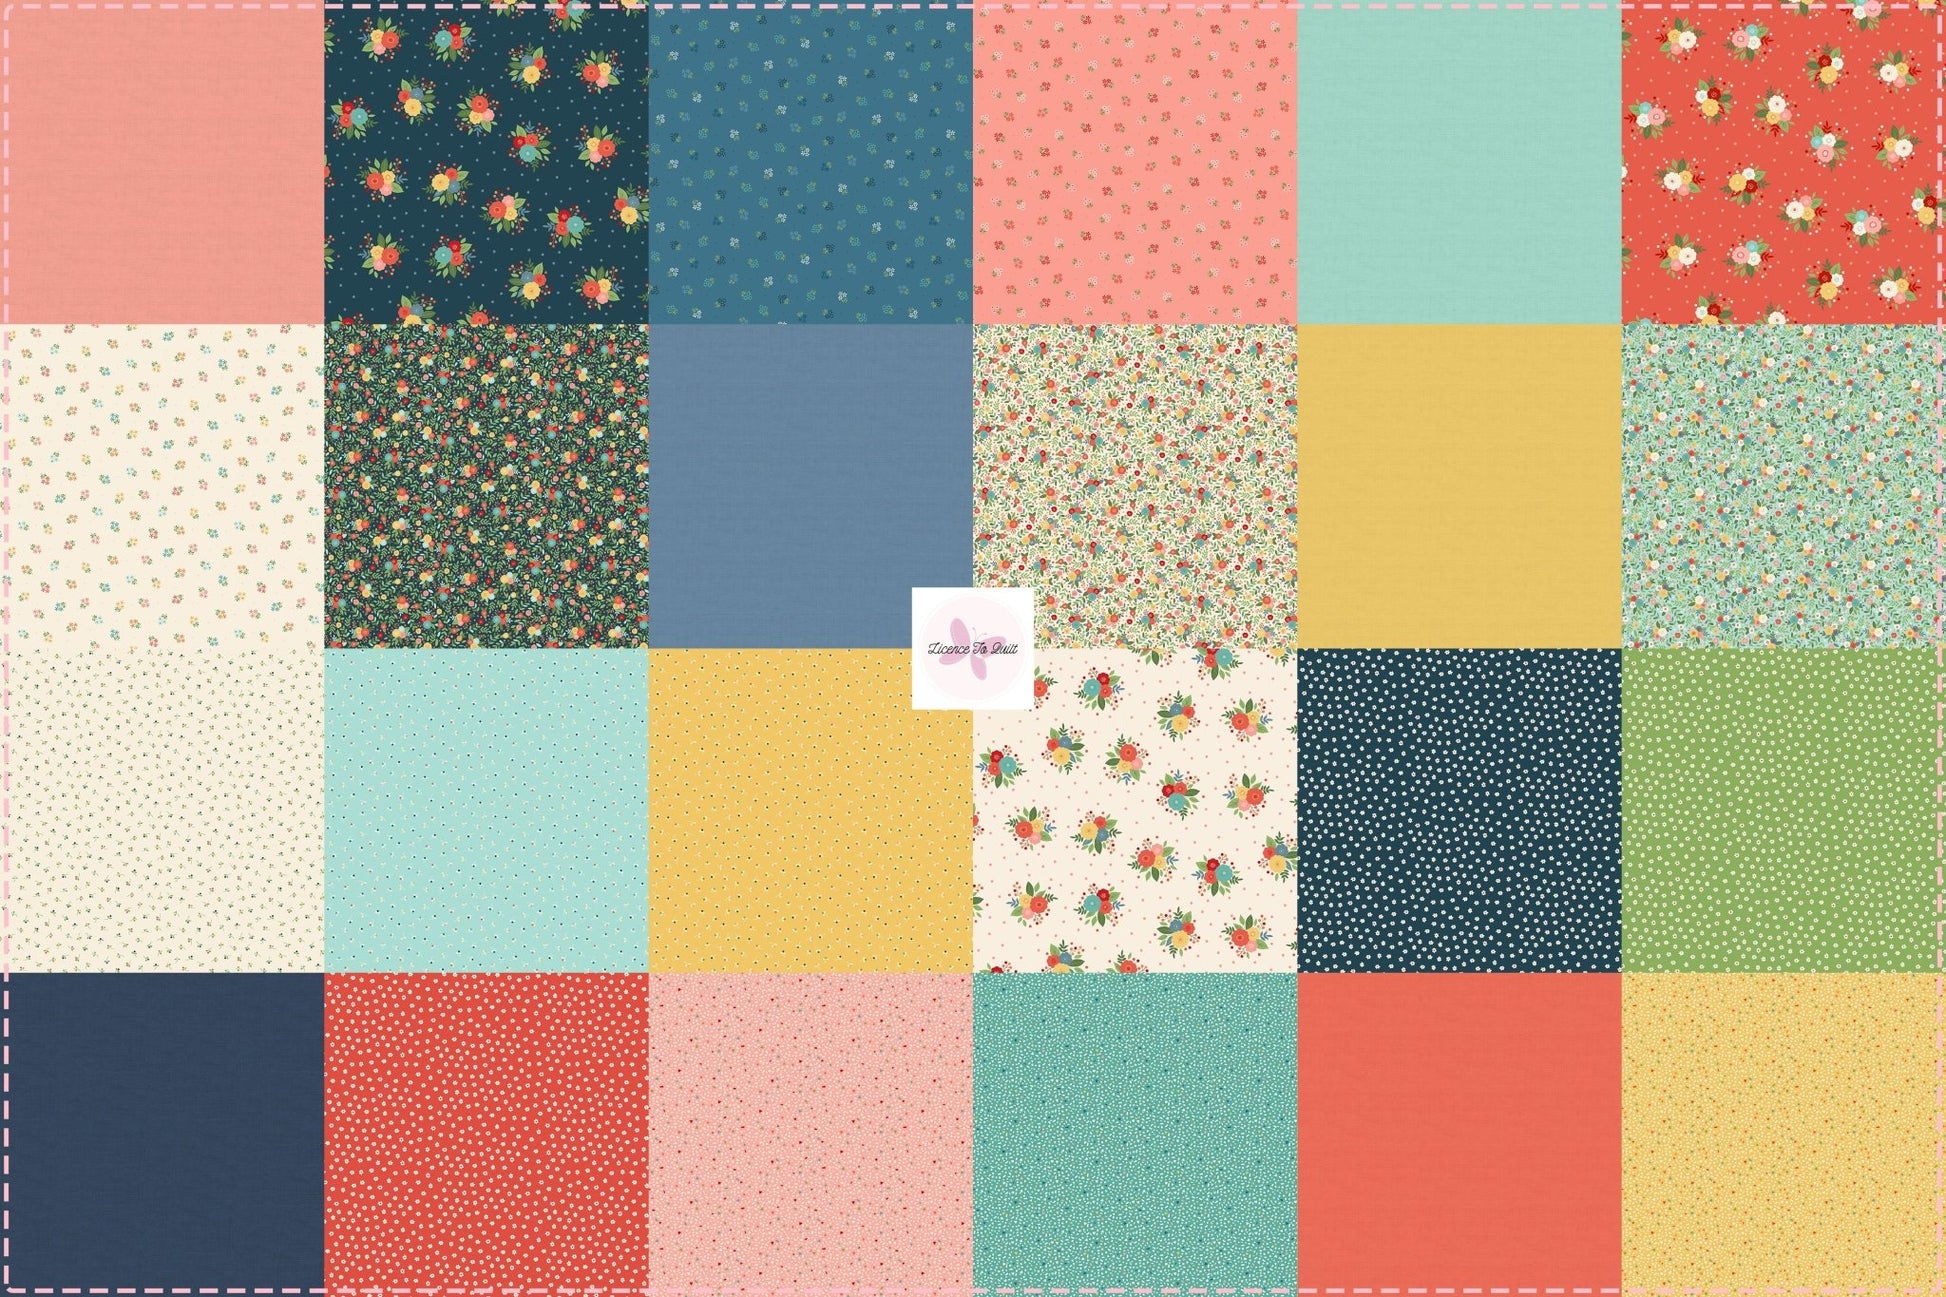 Amelia - Floral Teal - Licence To Quilt